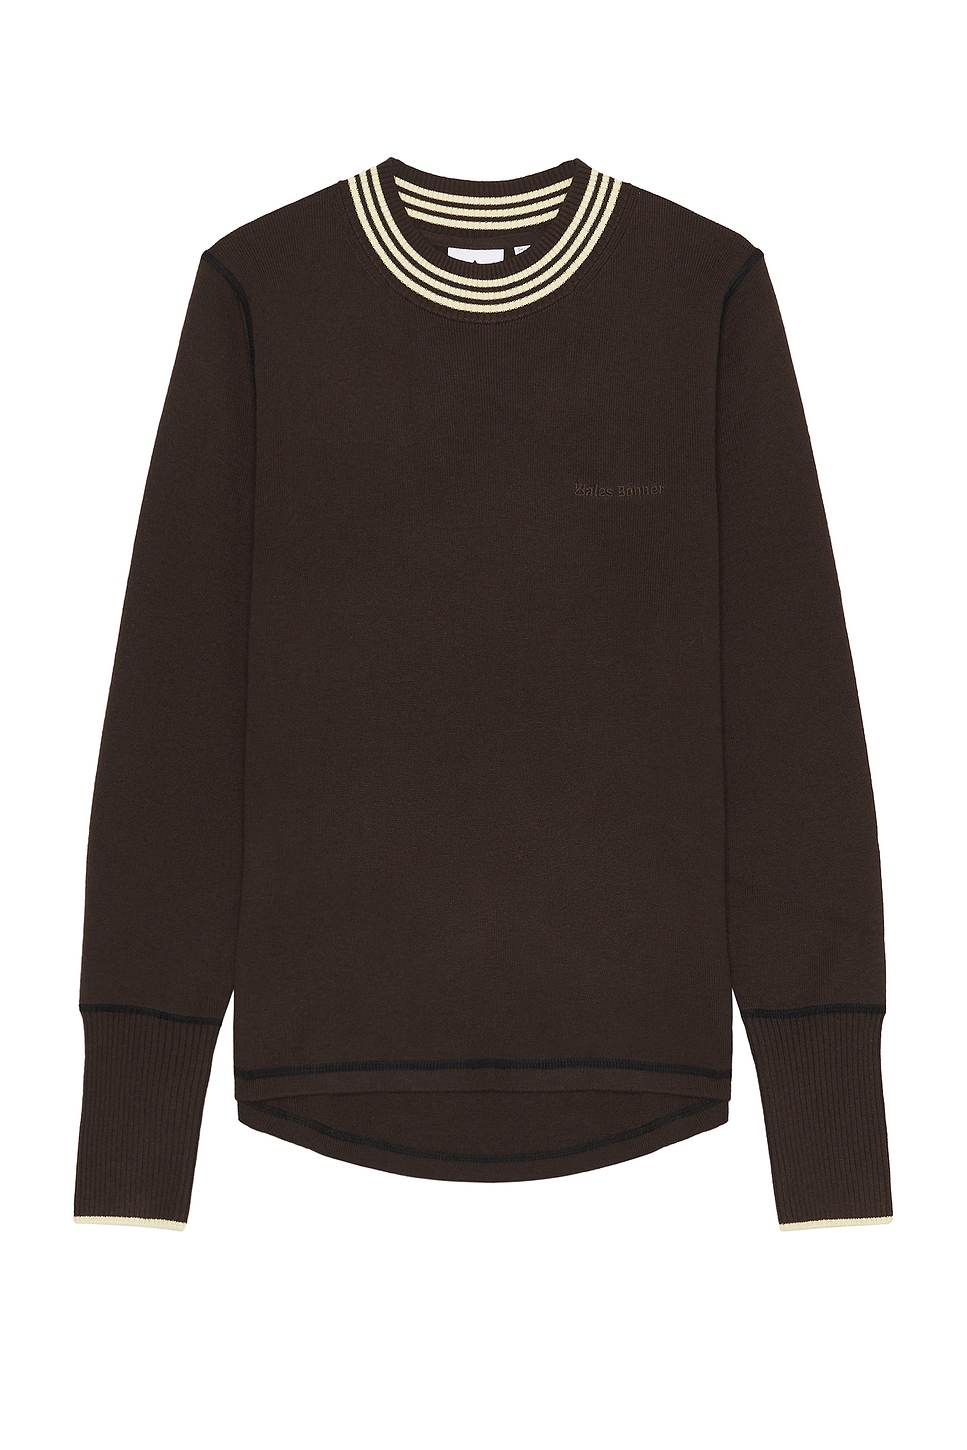 Image 1 of adidas by Wales Bonner Knit Top in Dark Brown